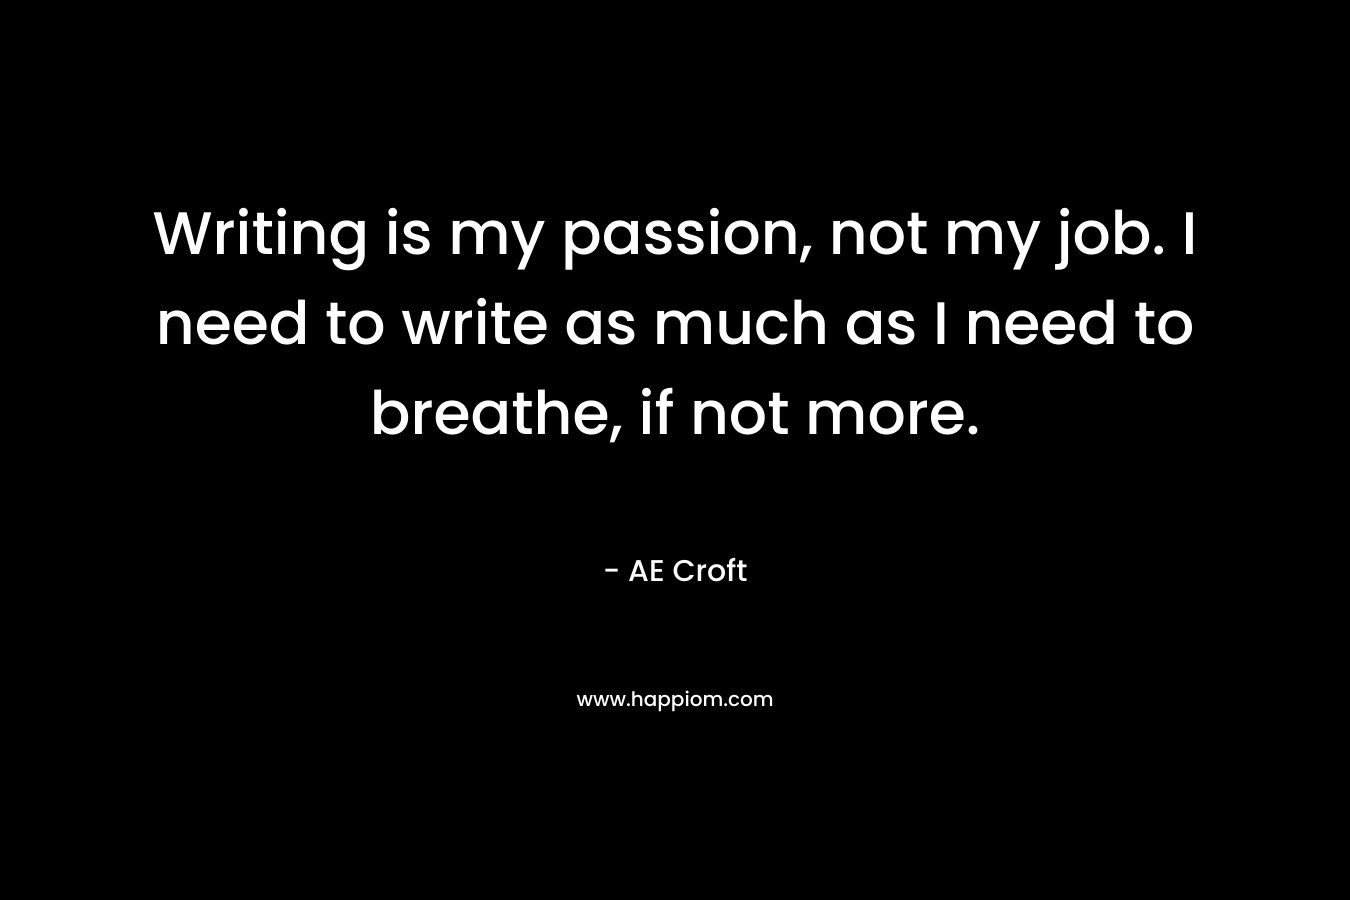 Writing is my passion, not my job. I need to write as much as I need to breathe, if not more.